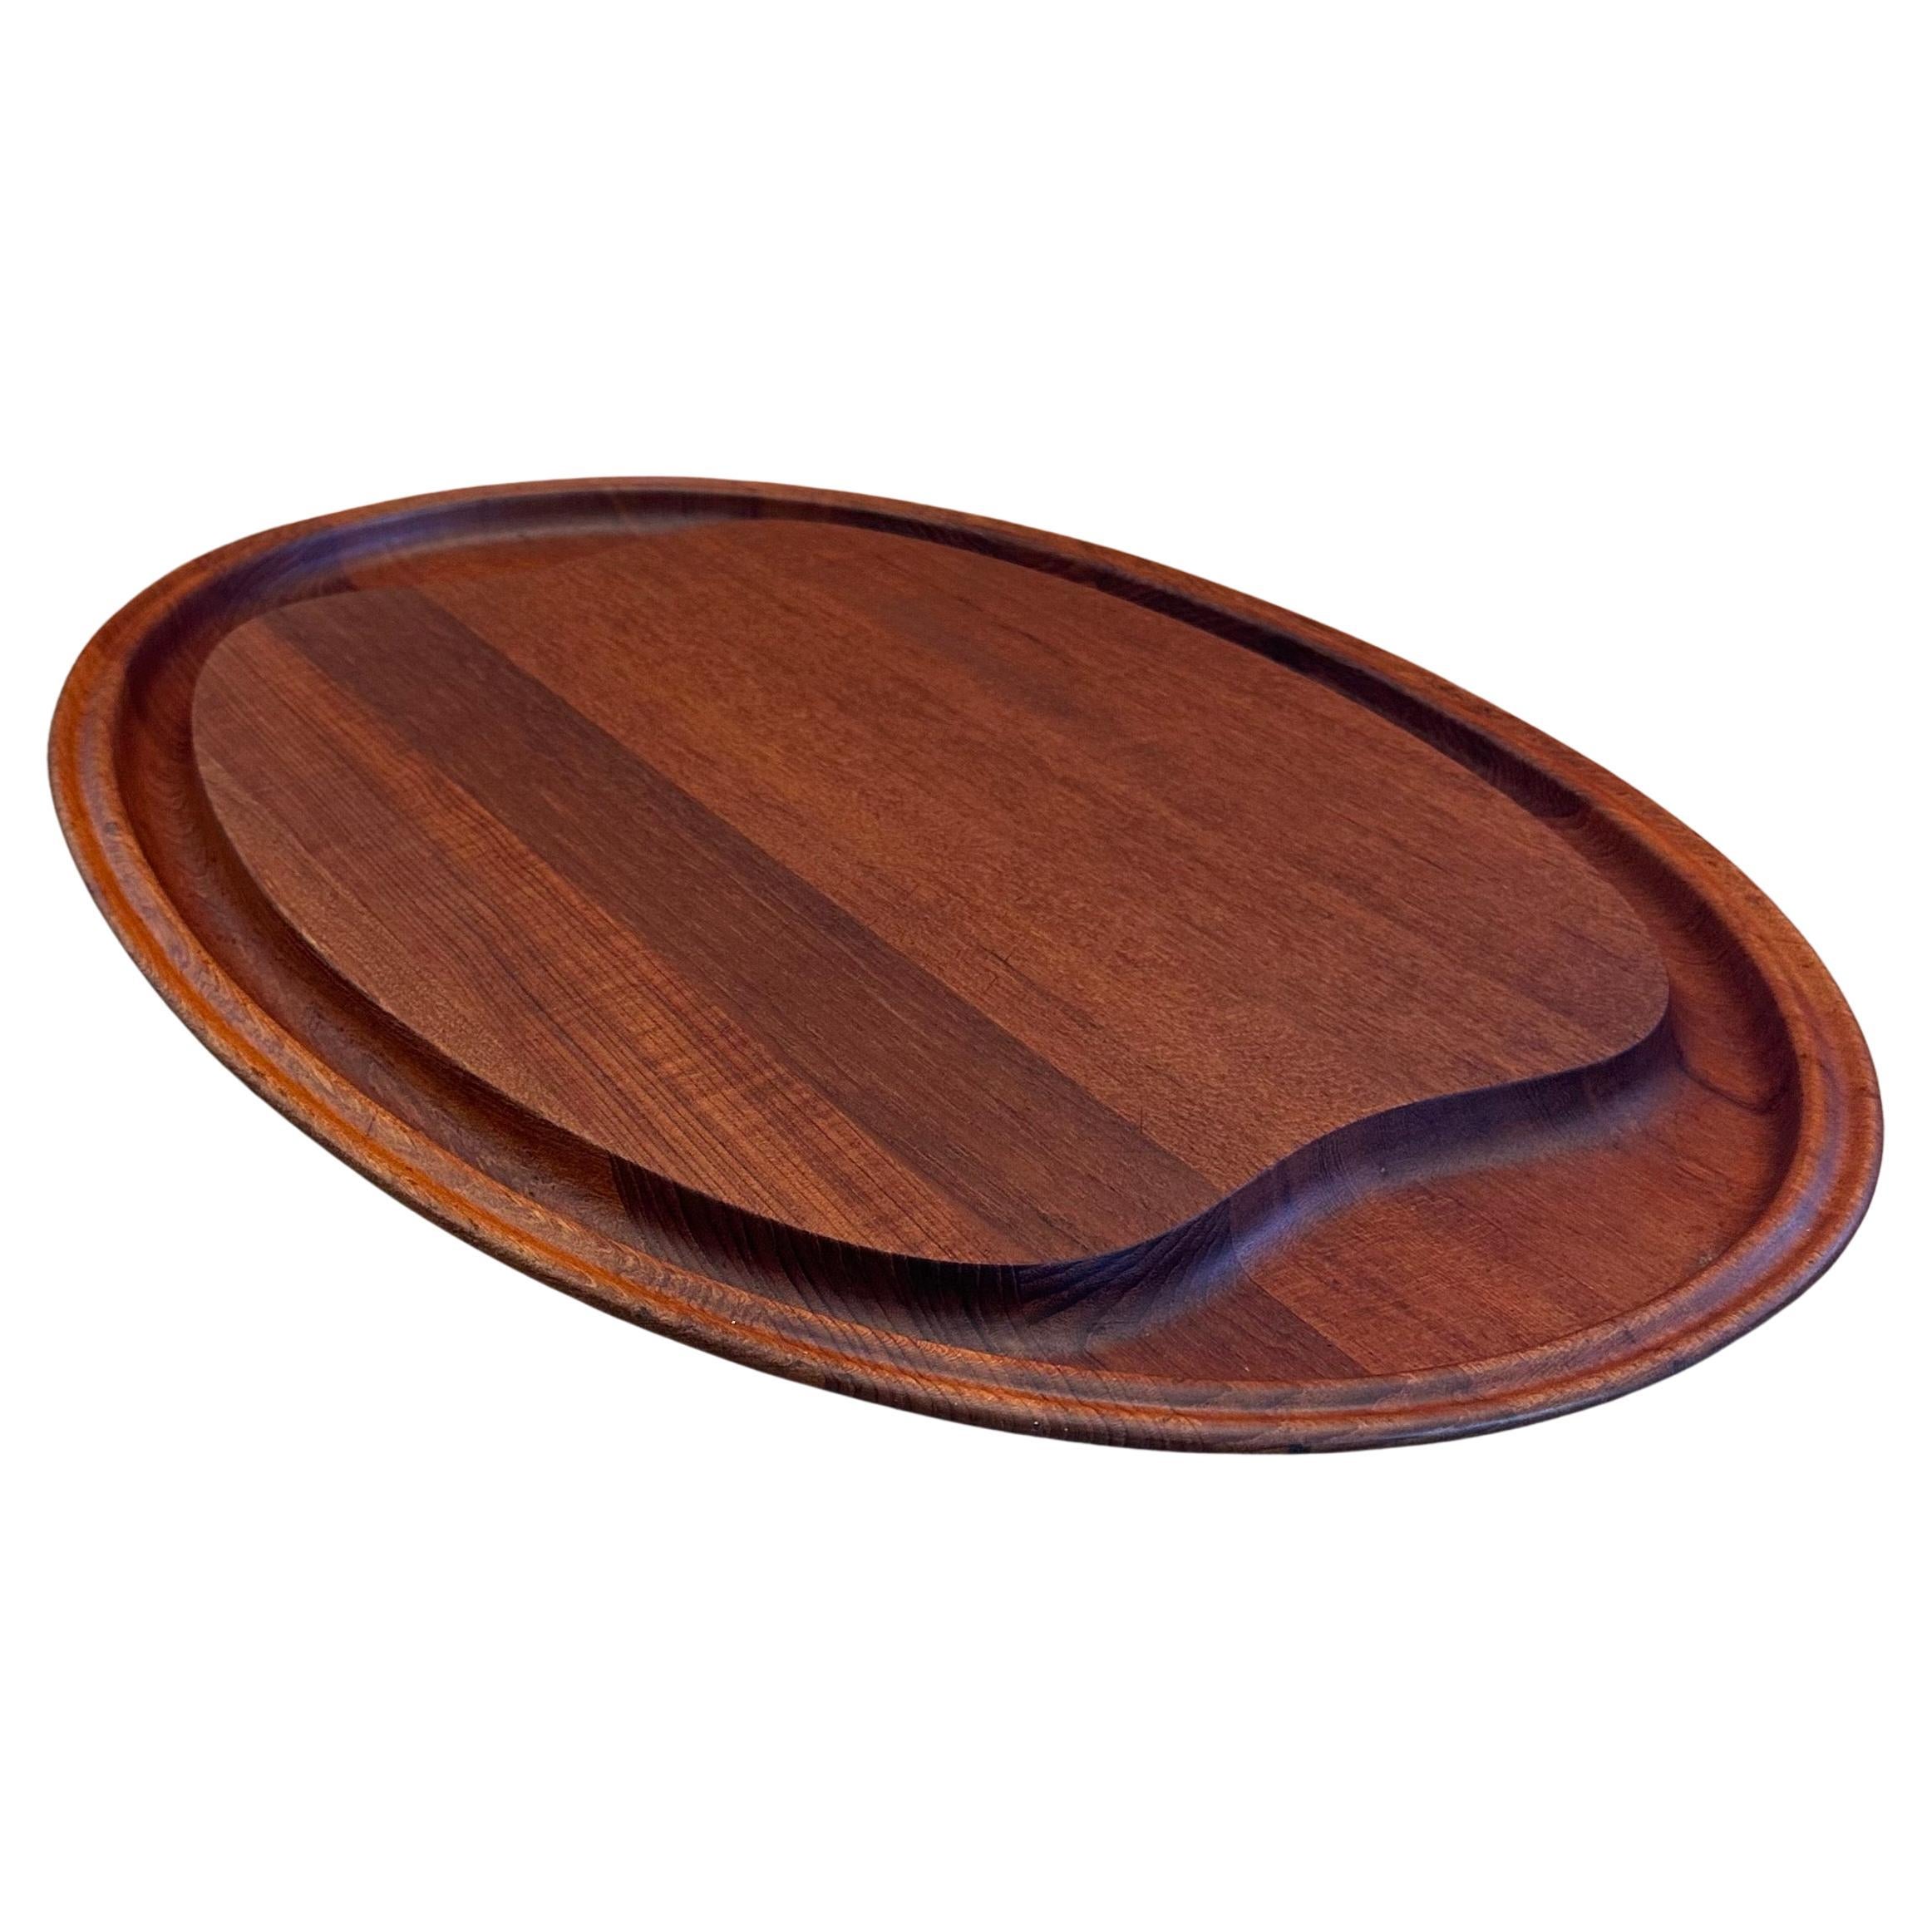 Danish Modern Staved Teak Carving Board by Henning Koppel for George Jensen In Excellent Condition For Sale In San Diego, CA